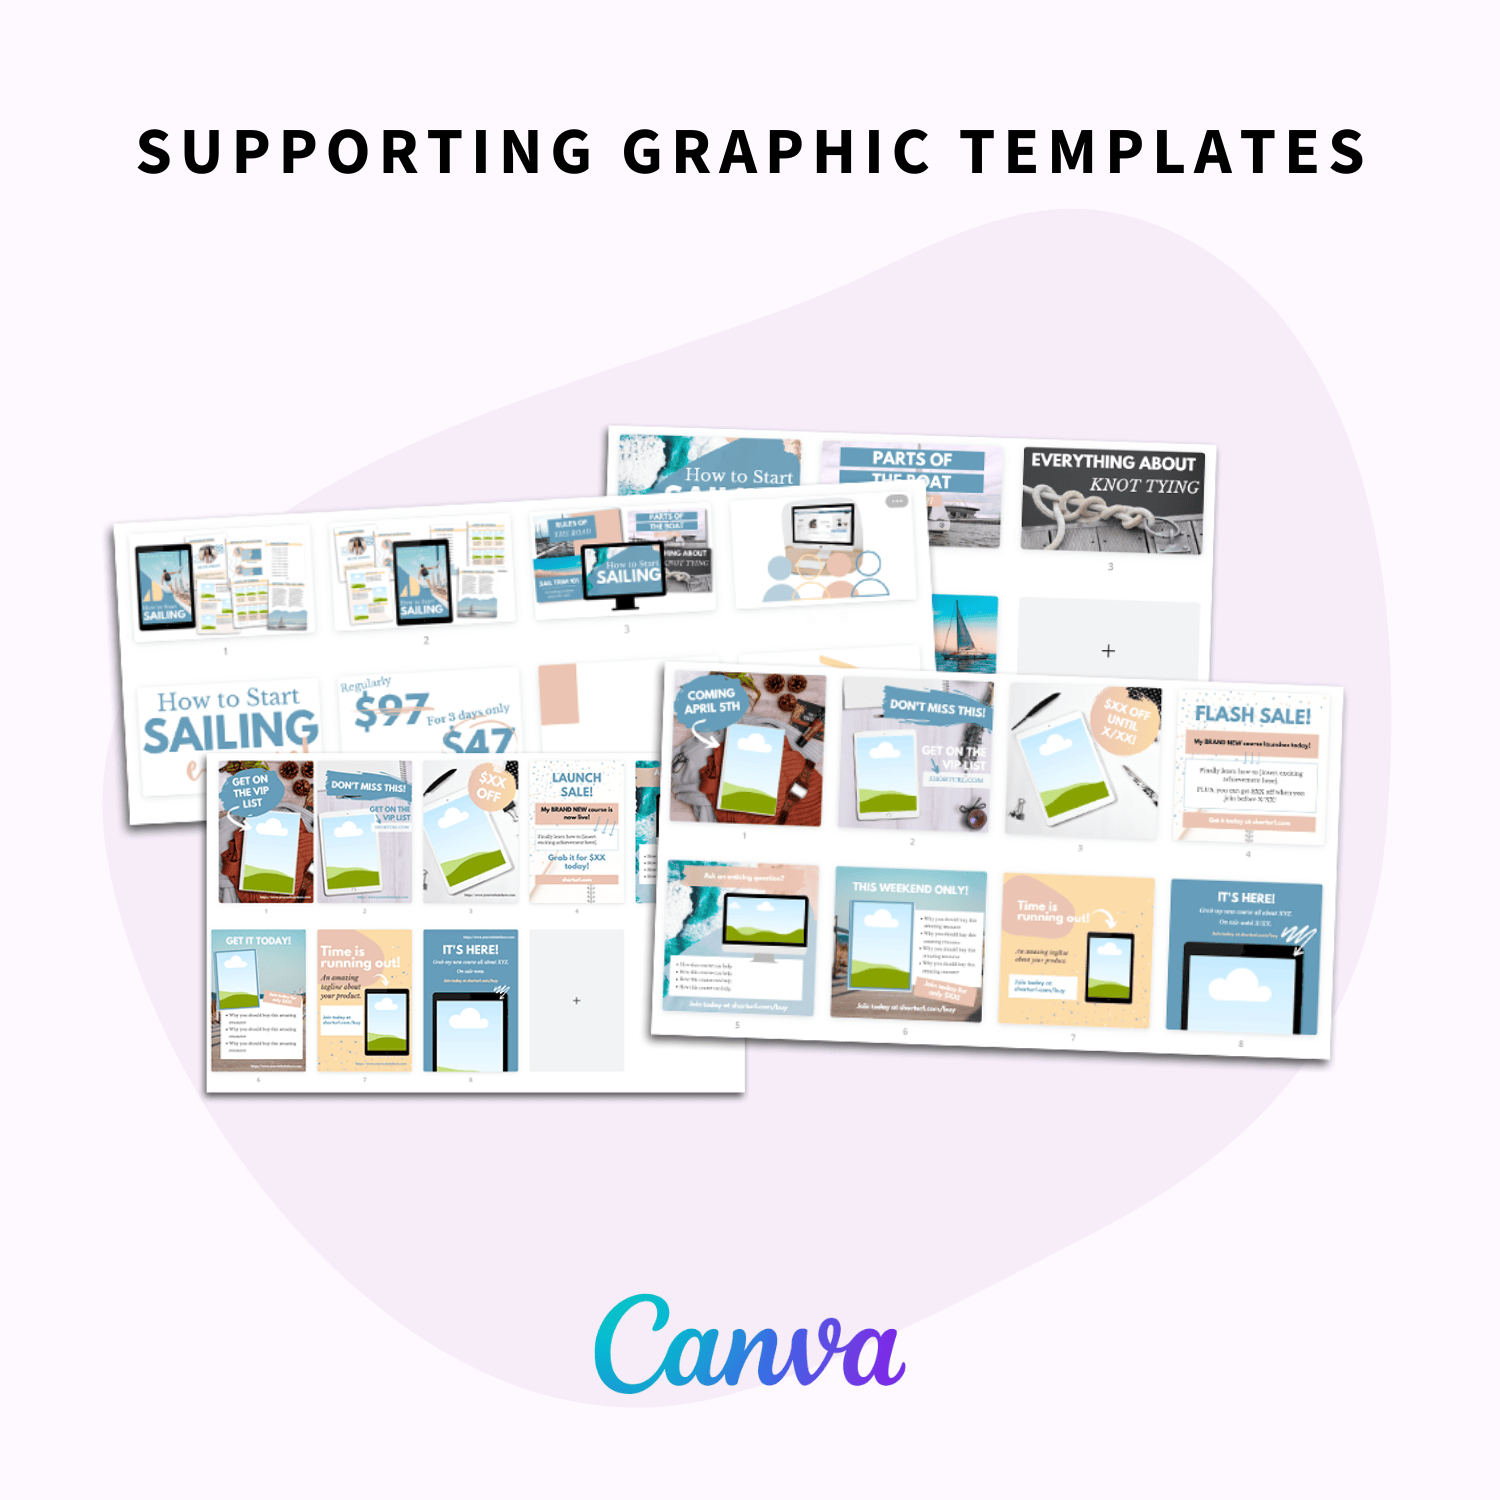 Supporting Graphic Templates in the Create and Execute an Easy Flash Sale Toolbox